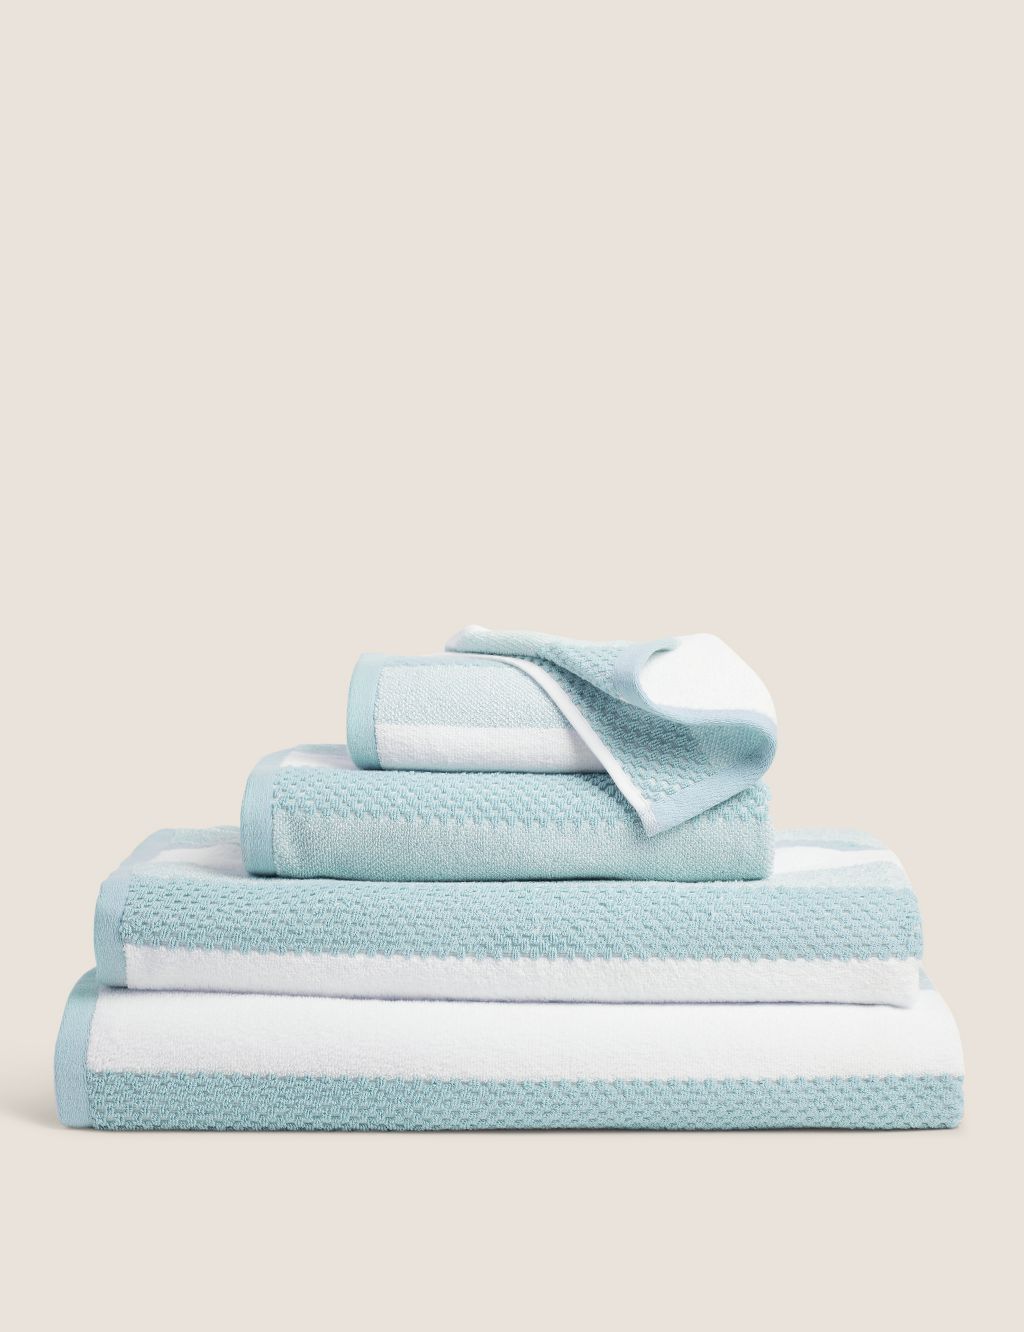 Pure Cotton Striped Textured Towel image 3